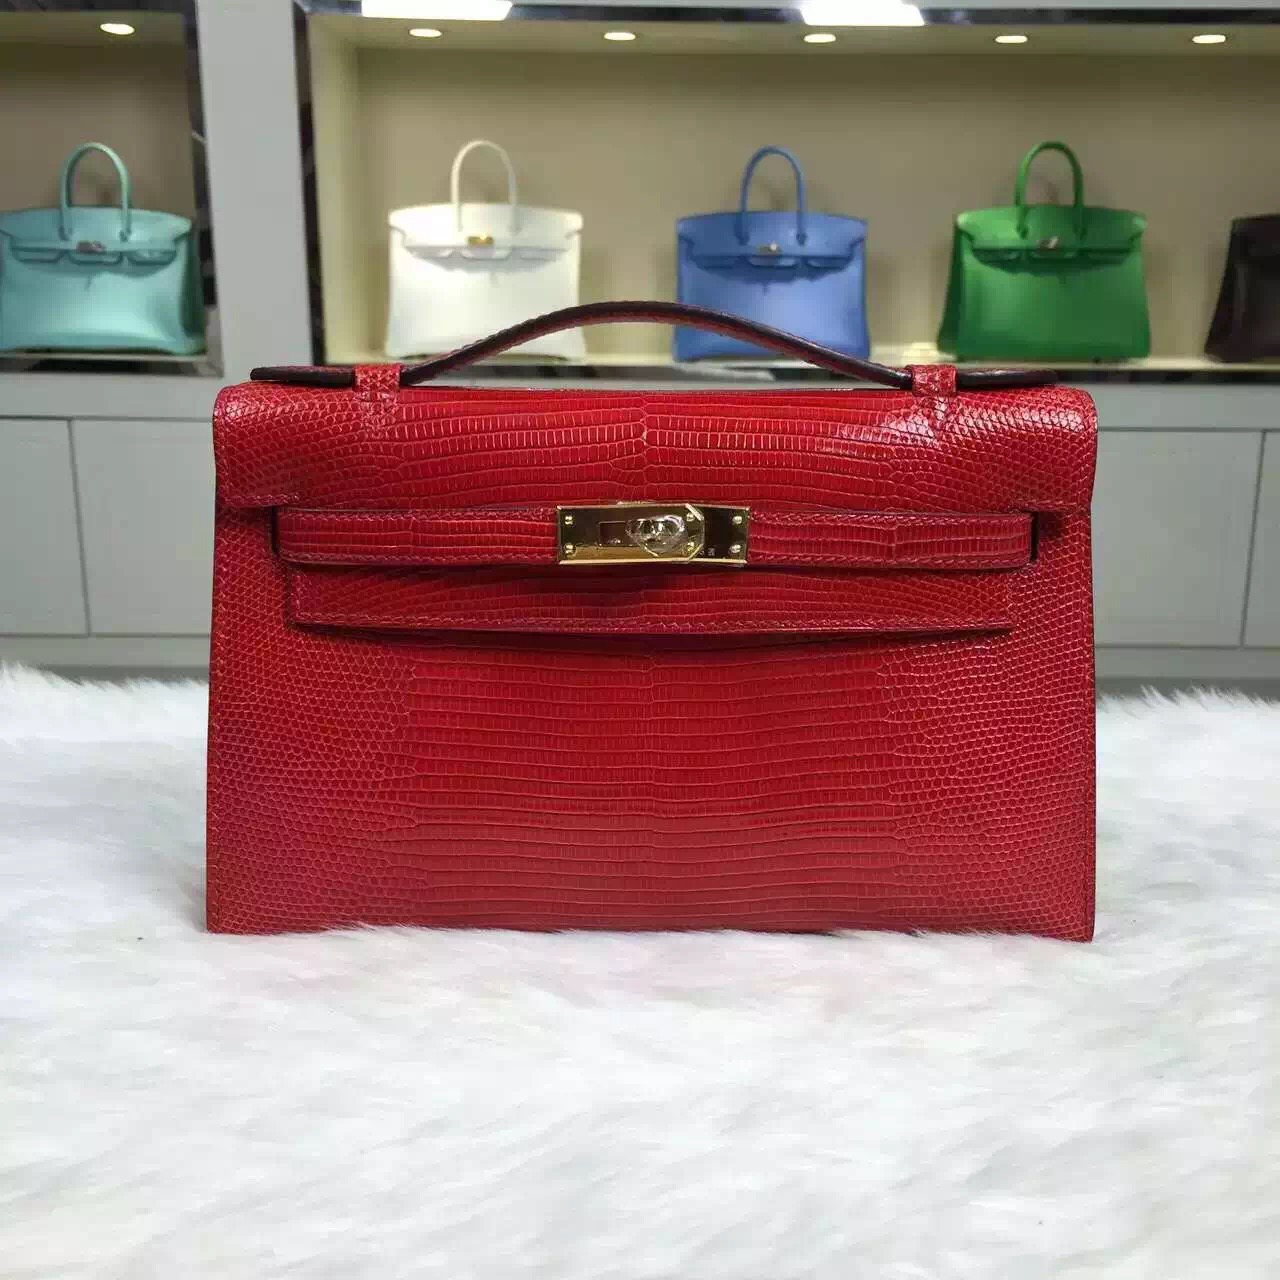 Wholesale Hermes Lizard Skin Leather Mini Kelly Pochette Clutch Bag in Chinese Red 22CM